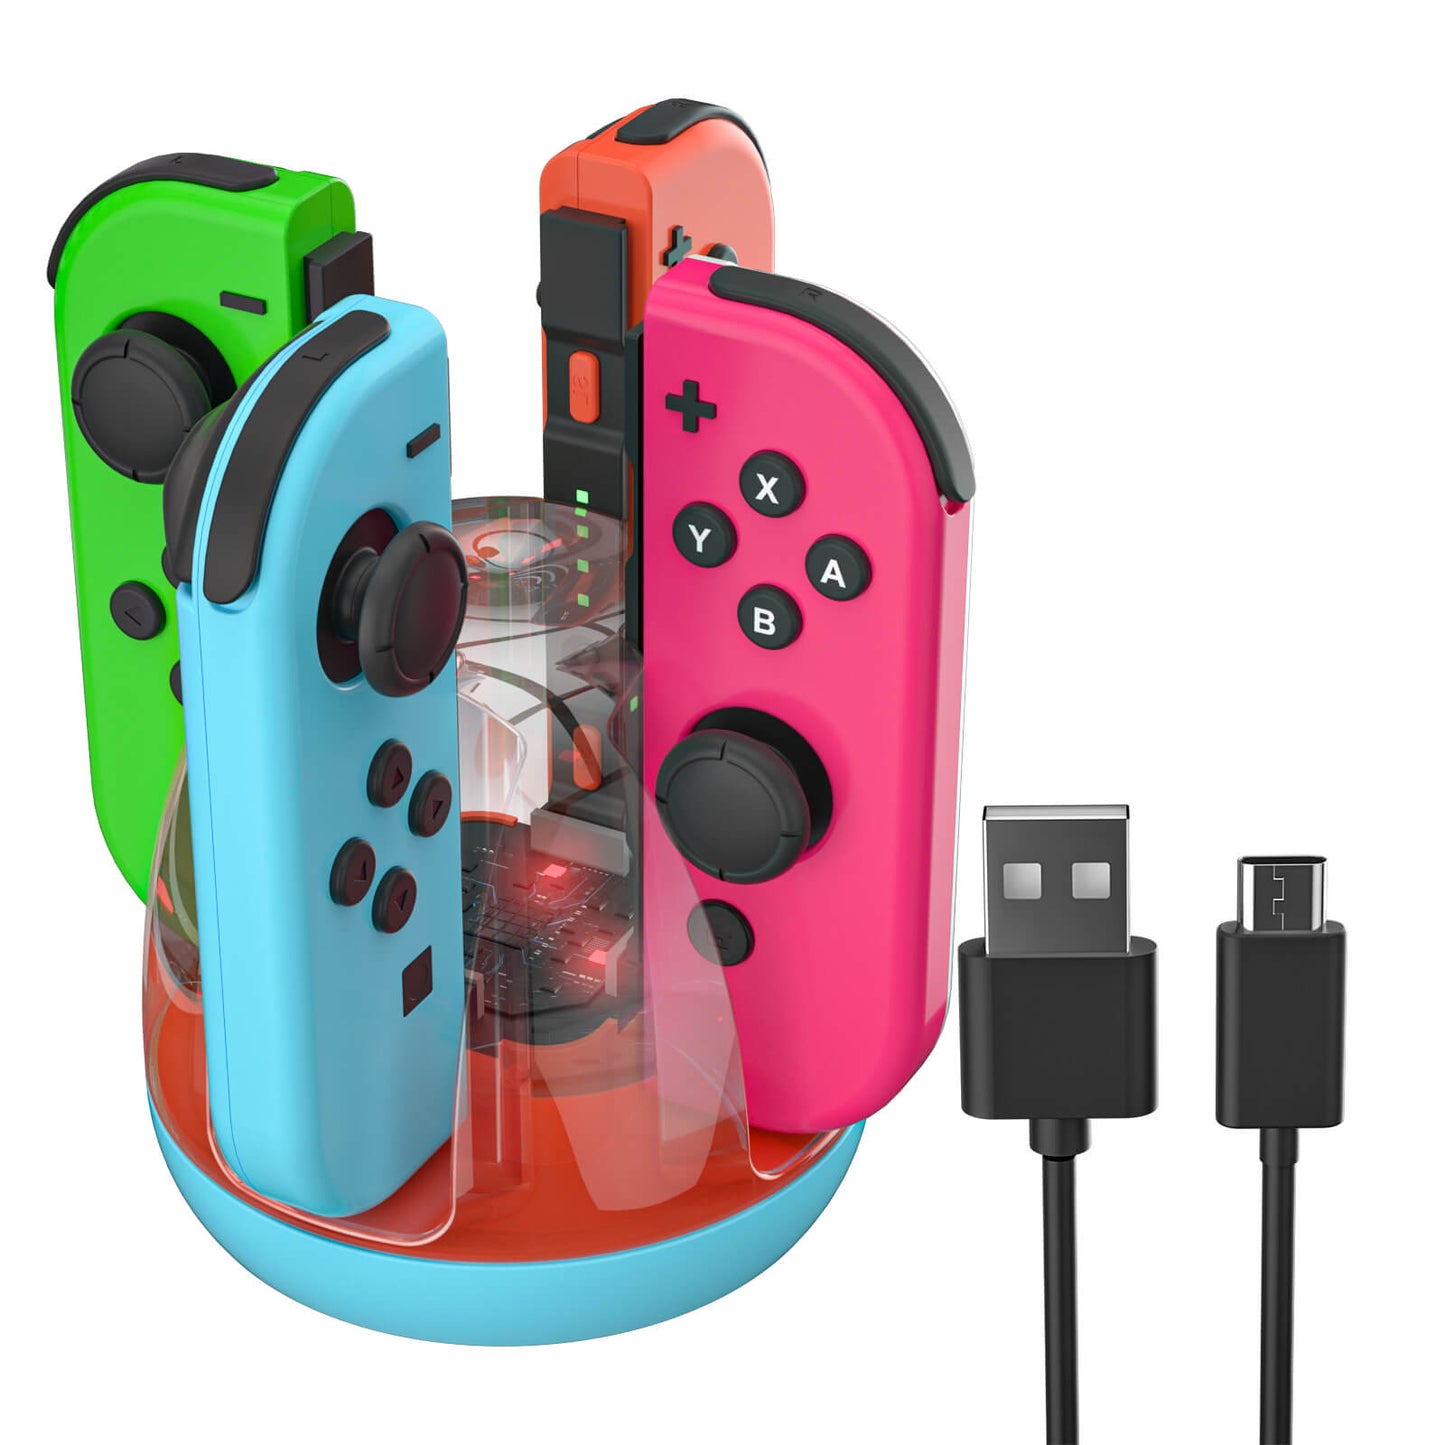 Nintendo Switch Joy Con Charger - Blue Green